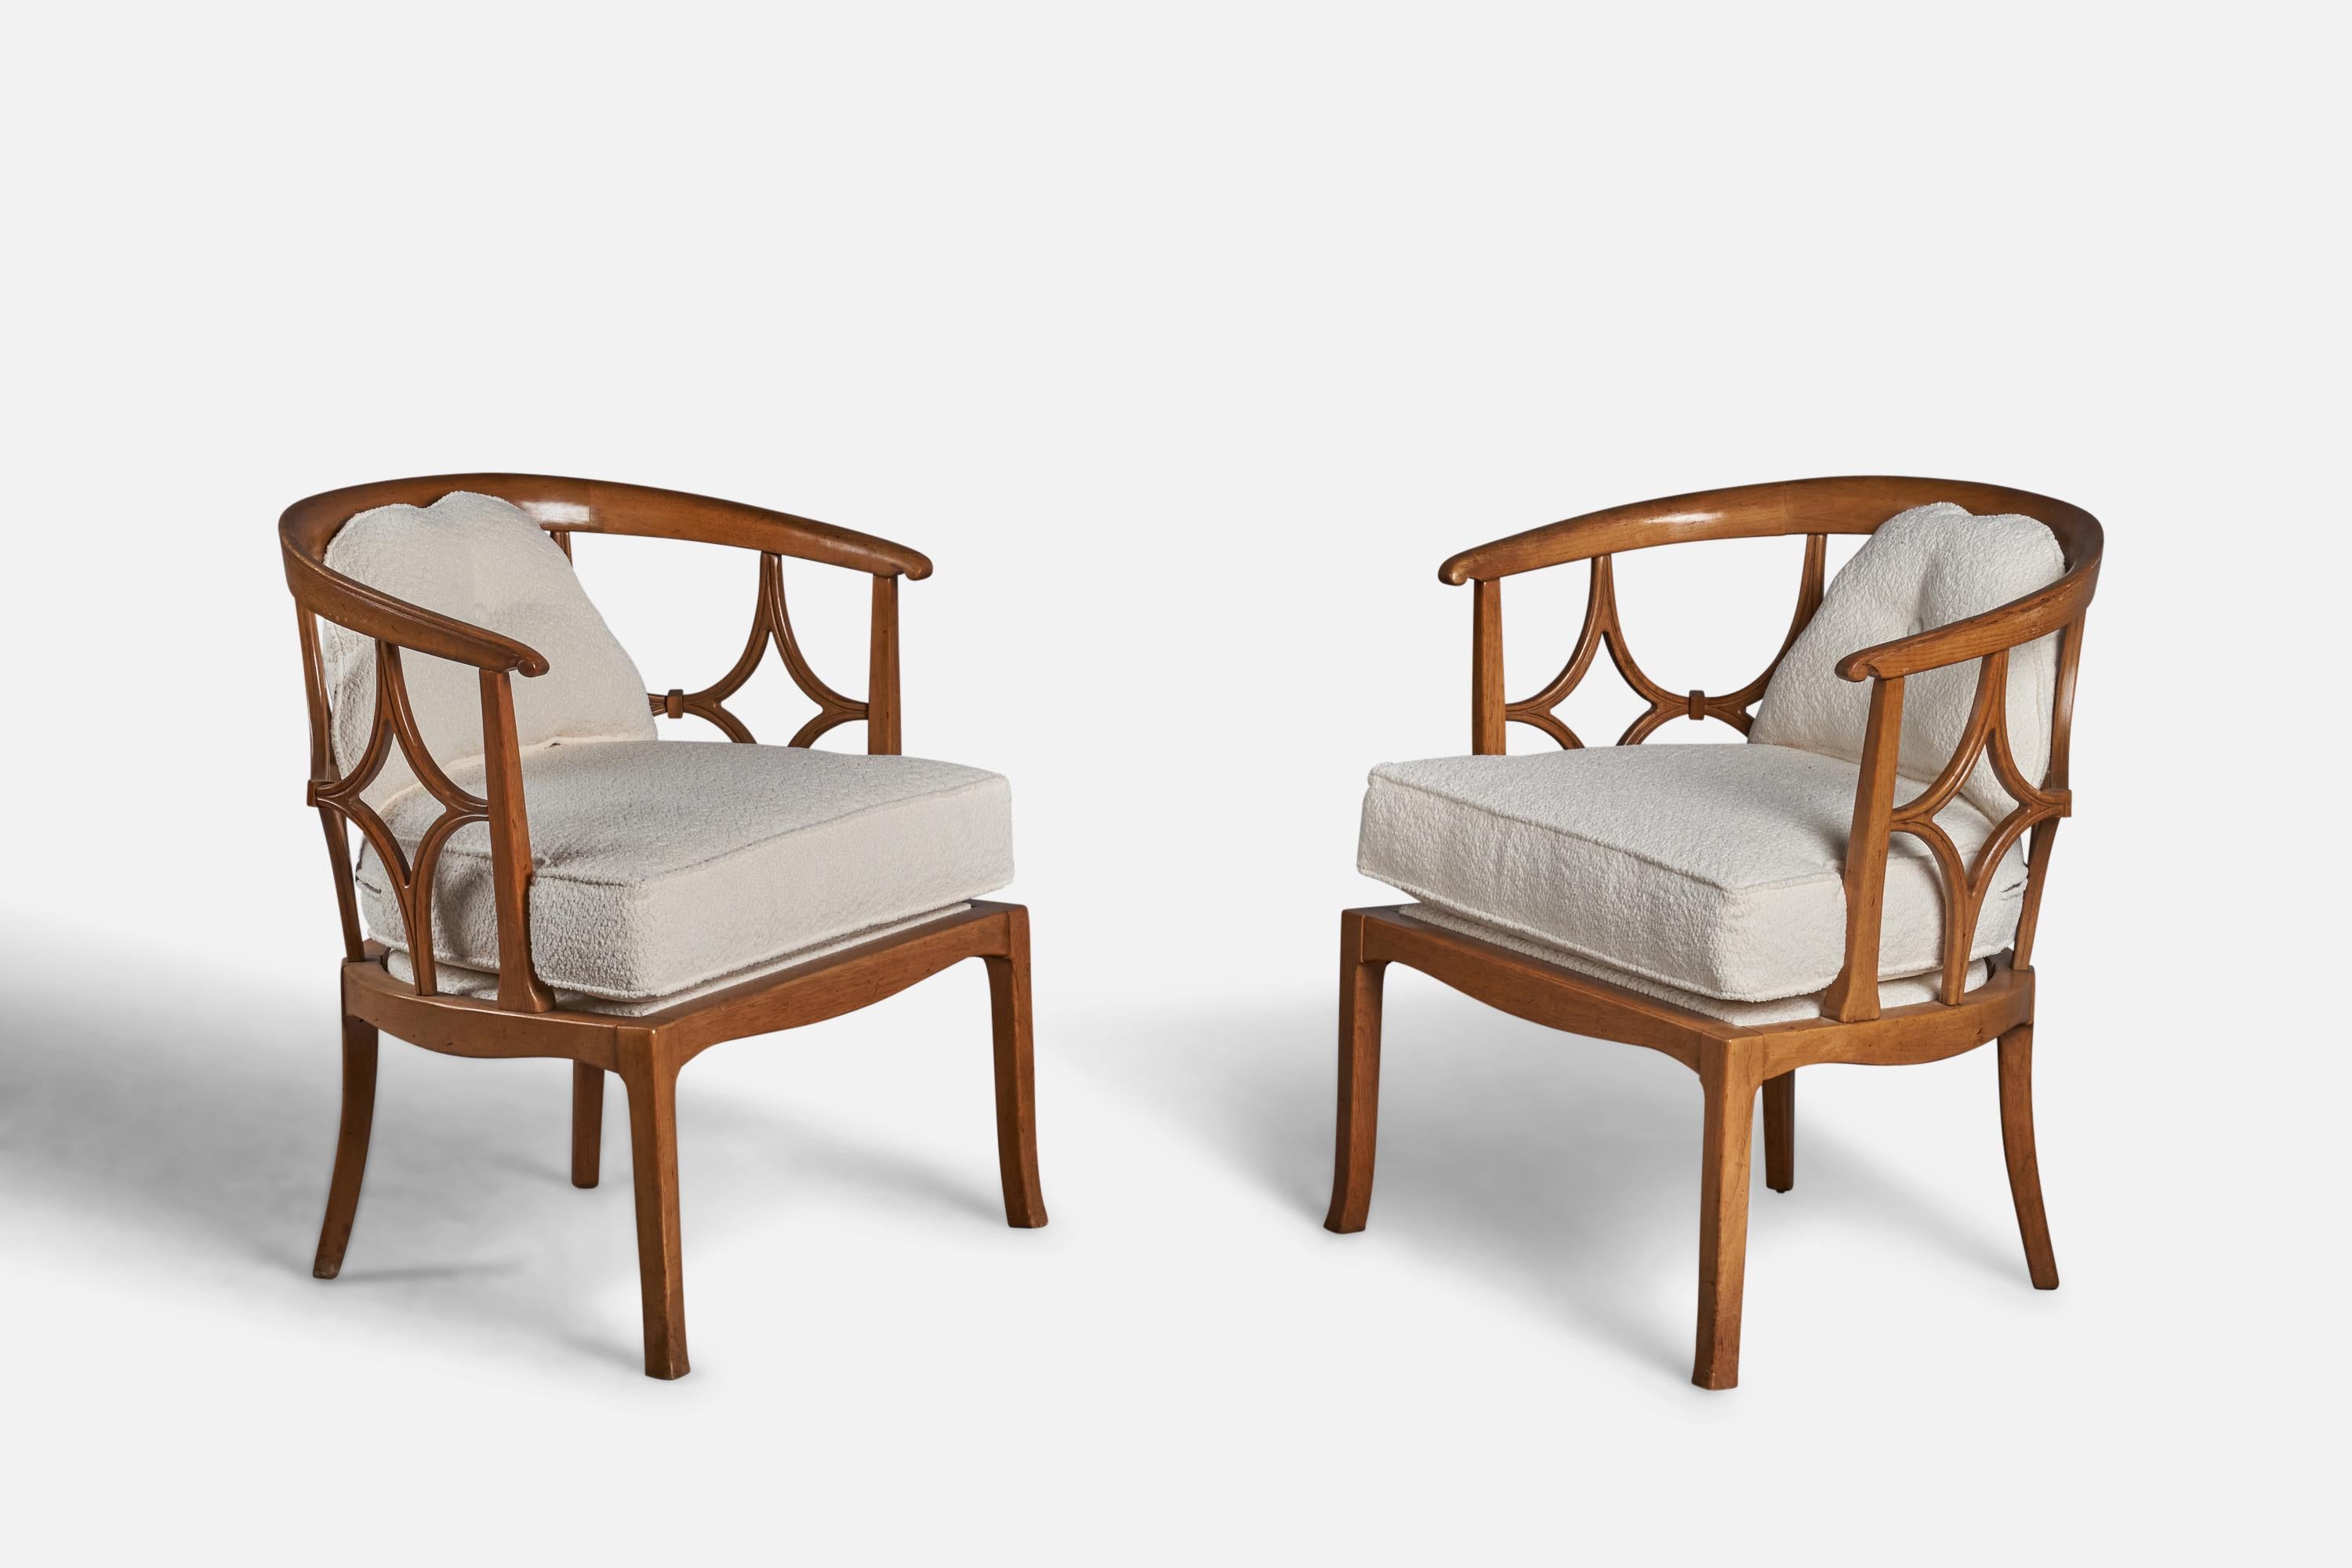 A pair of stained oak and white bouclé fabric lounge chairs designed and produced in the US, c. 1940s.
19